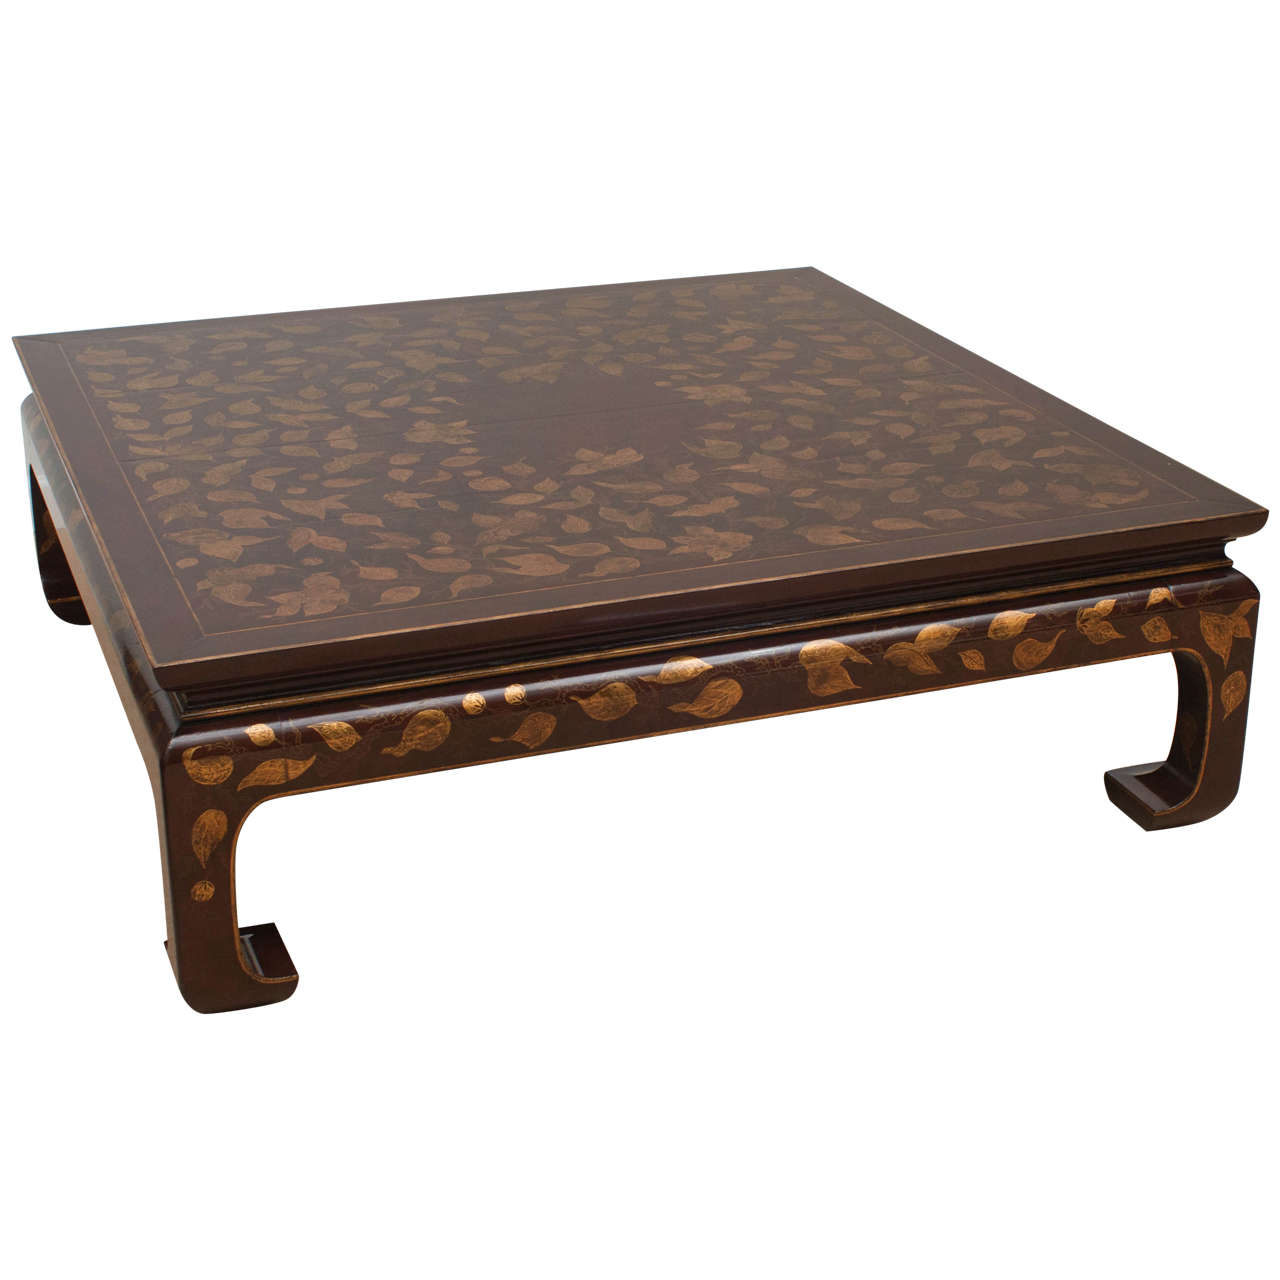 Rose Tarlow Chinese Ming Style Gilt Lacquer Coffee Table For Sale